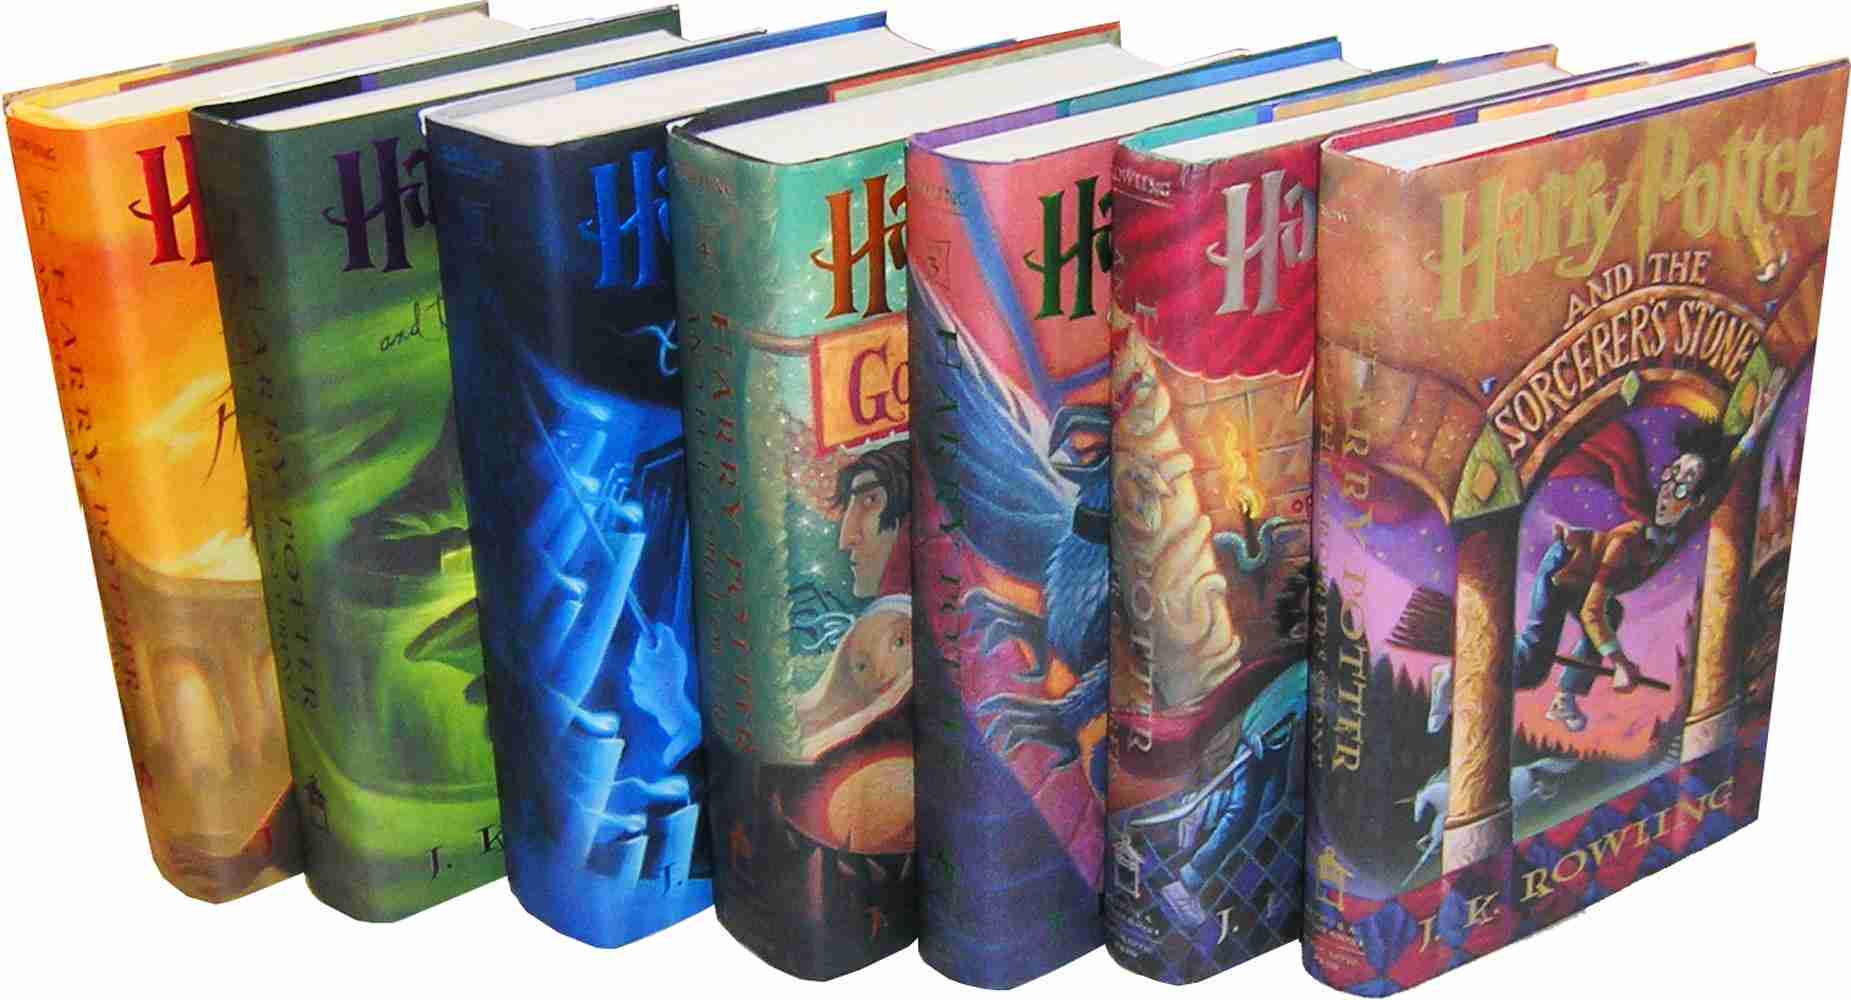 The Harry Potter series